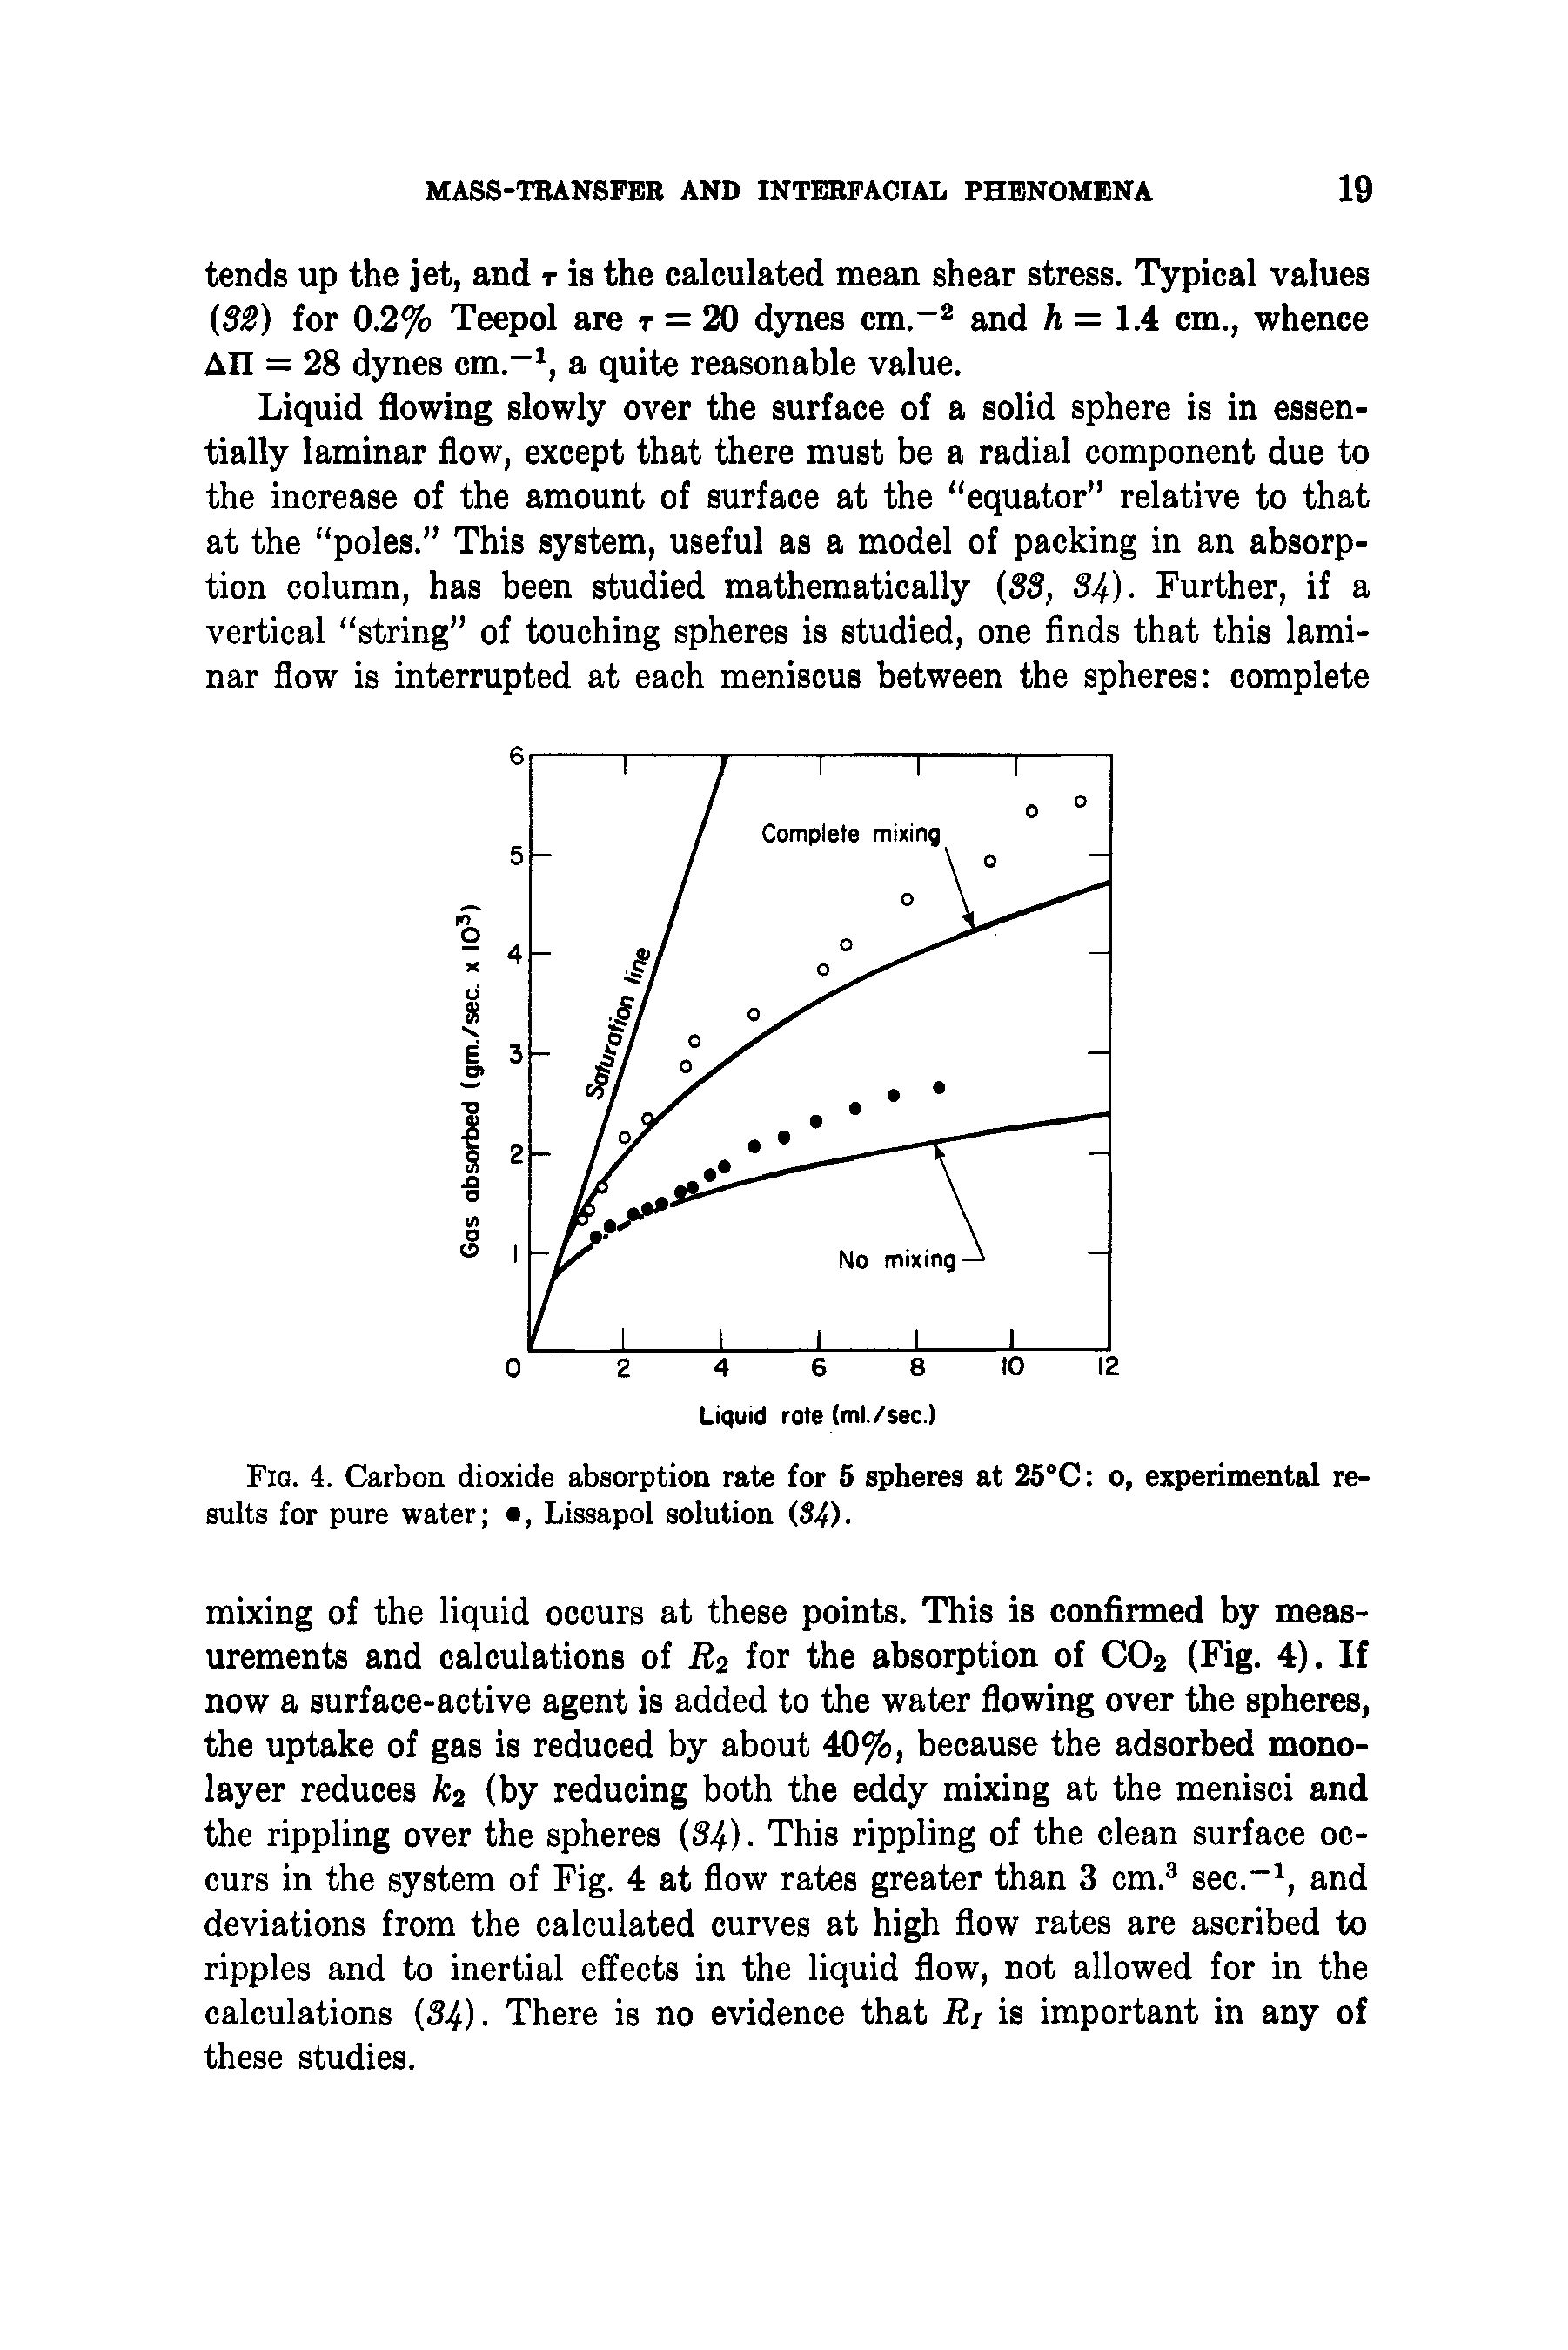 Fig. 4, Carbon dioxide absorption rate for 5 spheres at 25°C o, experimental results for pure water , Lissapol solution (S4).